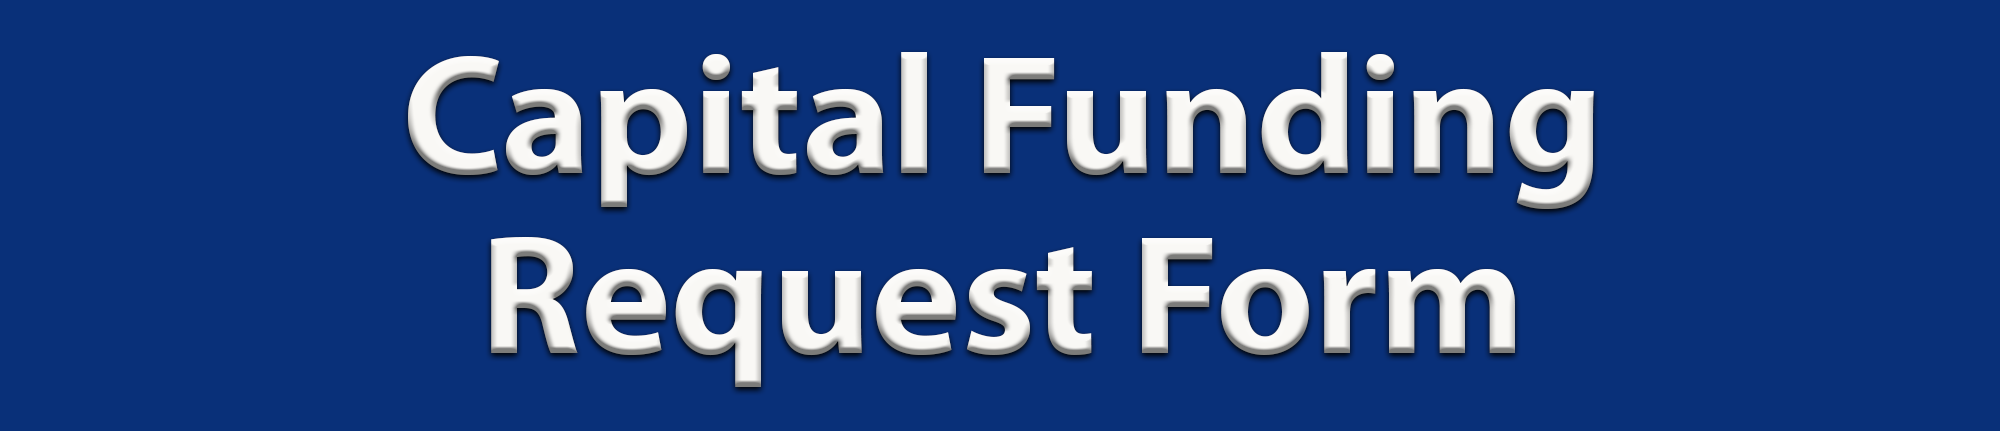 Capital Funding Request Form